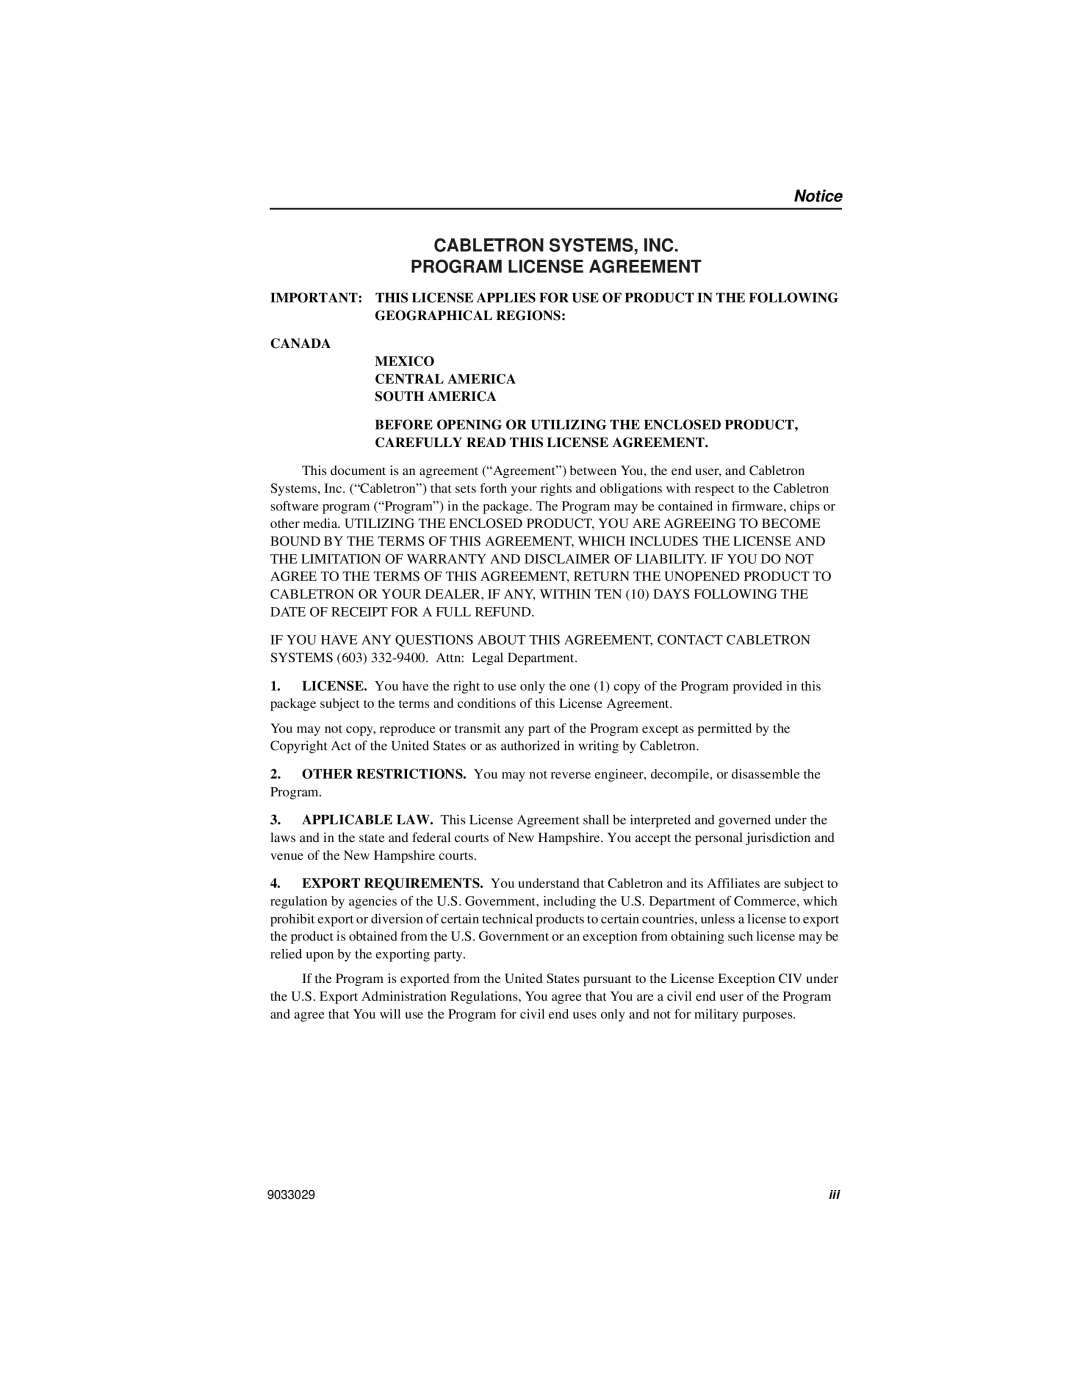 Cabletron Systems ELS100-8TXUF2 Cabletron Systems, Inc Program License Agreement, Carefully Read This License Agreement 